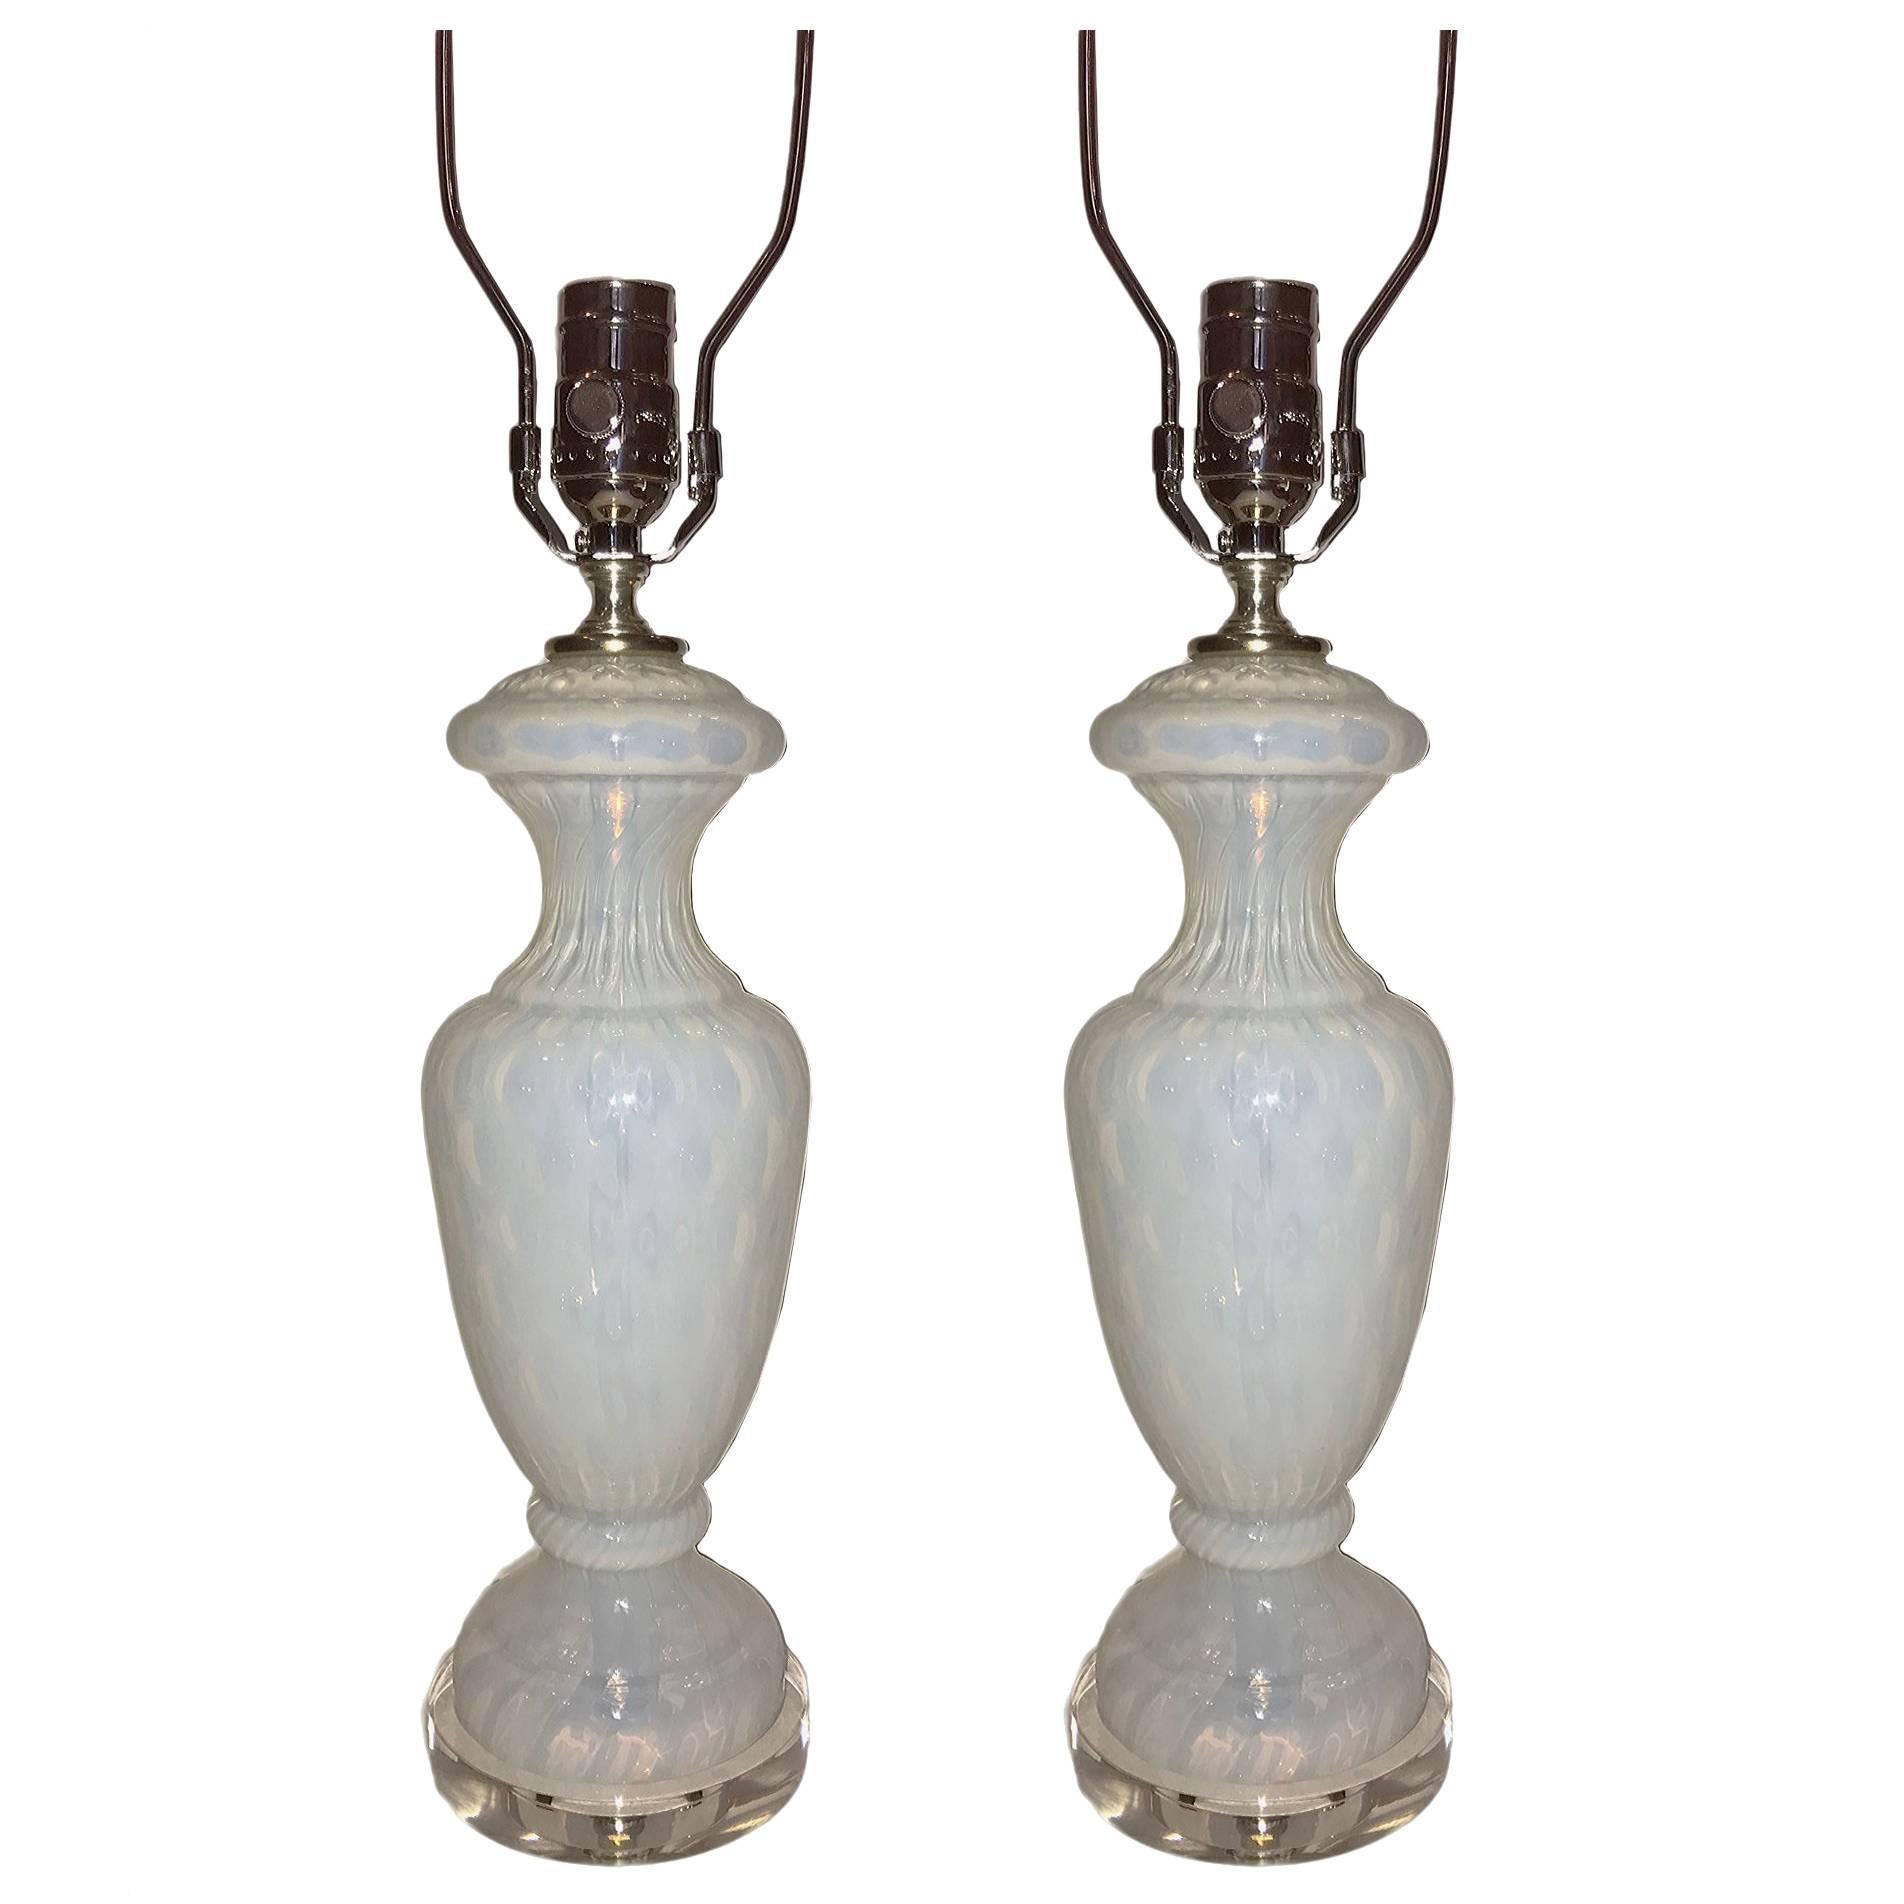 Pair of circa 1940's French opaline glass table lamps mounted on lucite bases.

Measurements:
Height of body: 13.75